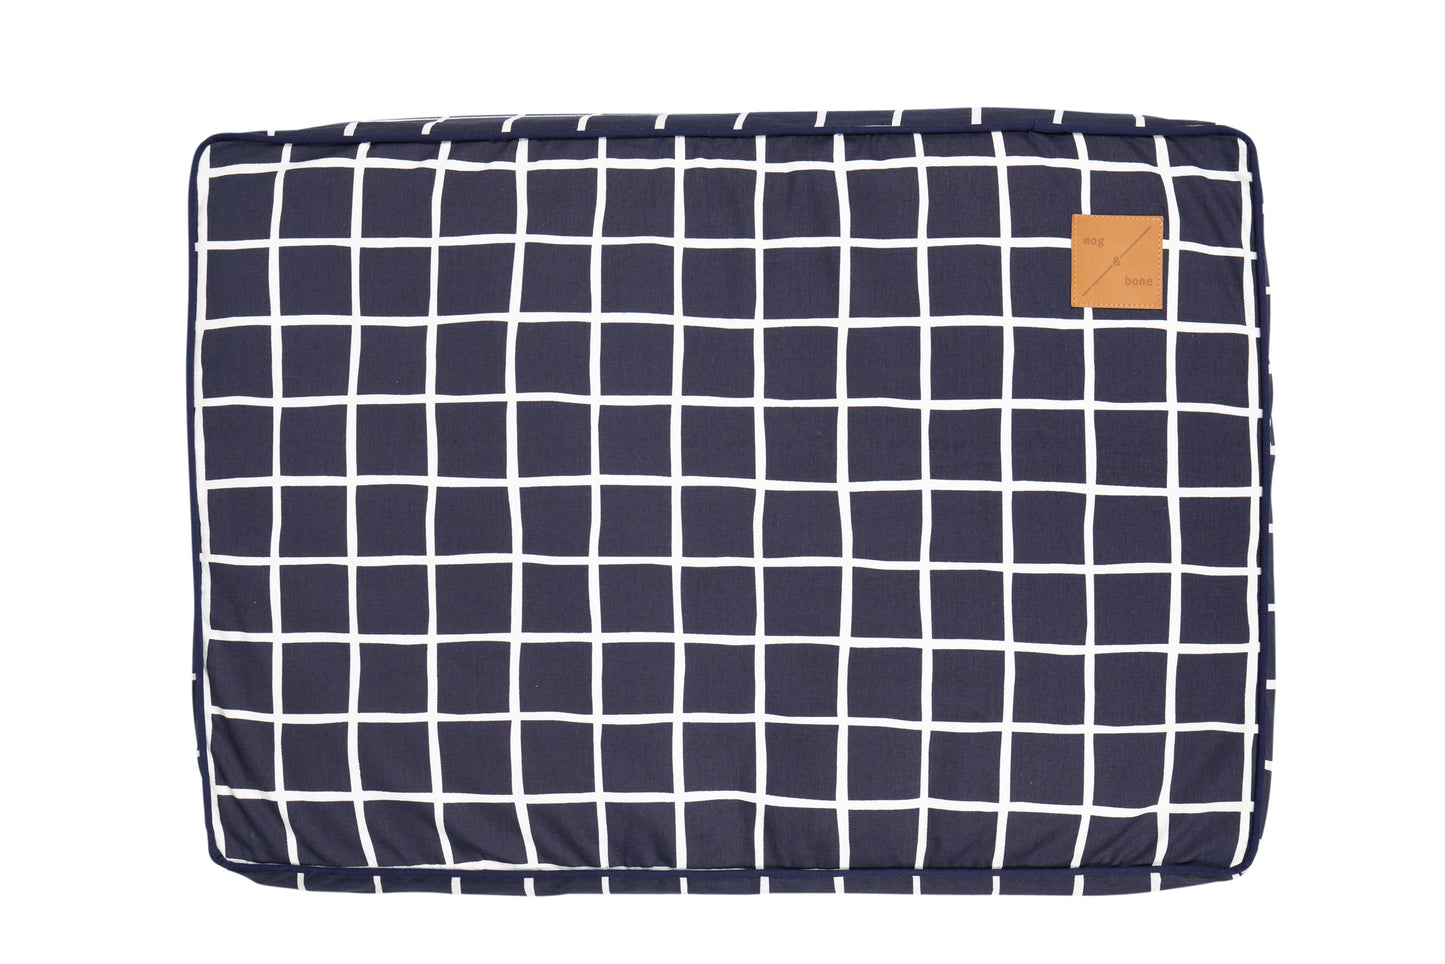 Cushion Bed COVER - Navy Check